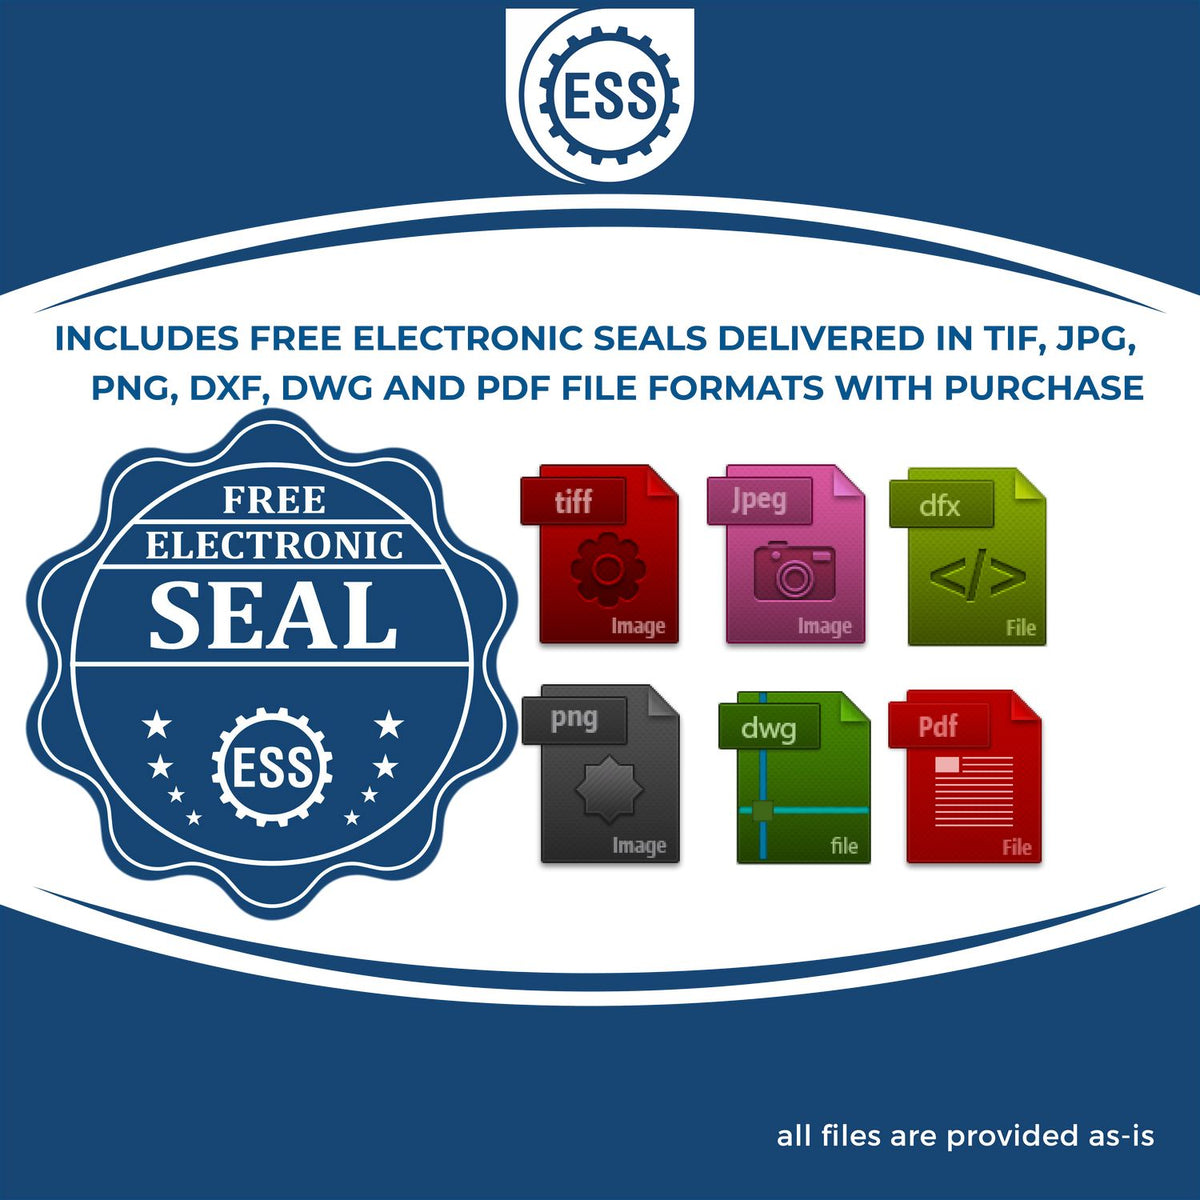 An infographic for the free electronic seal for the Heavy Duty Cast Iron Louisiana Geologist Seal Embosser illustrating the different file type icons such as DXF, DWG, TIF, JPG and PNG.